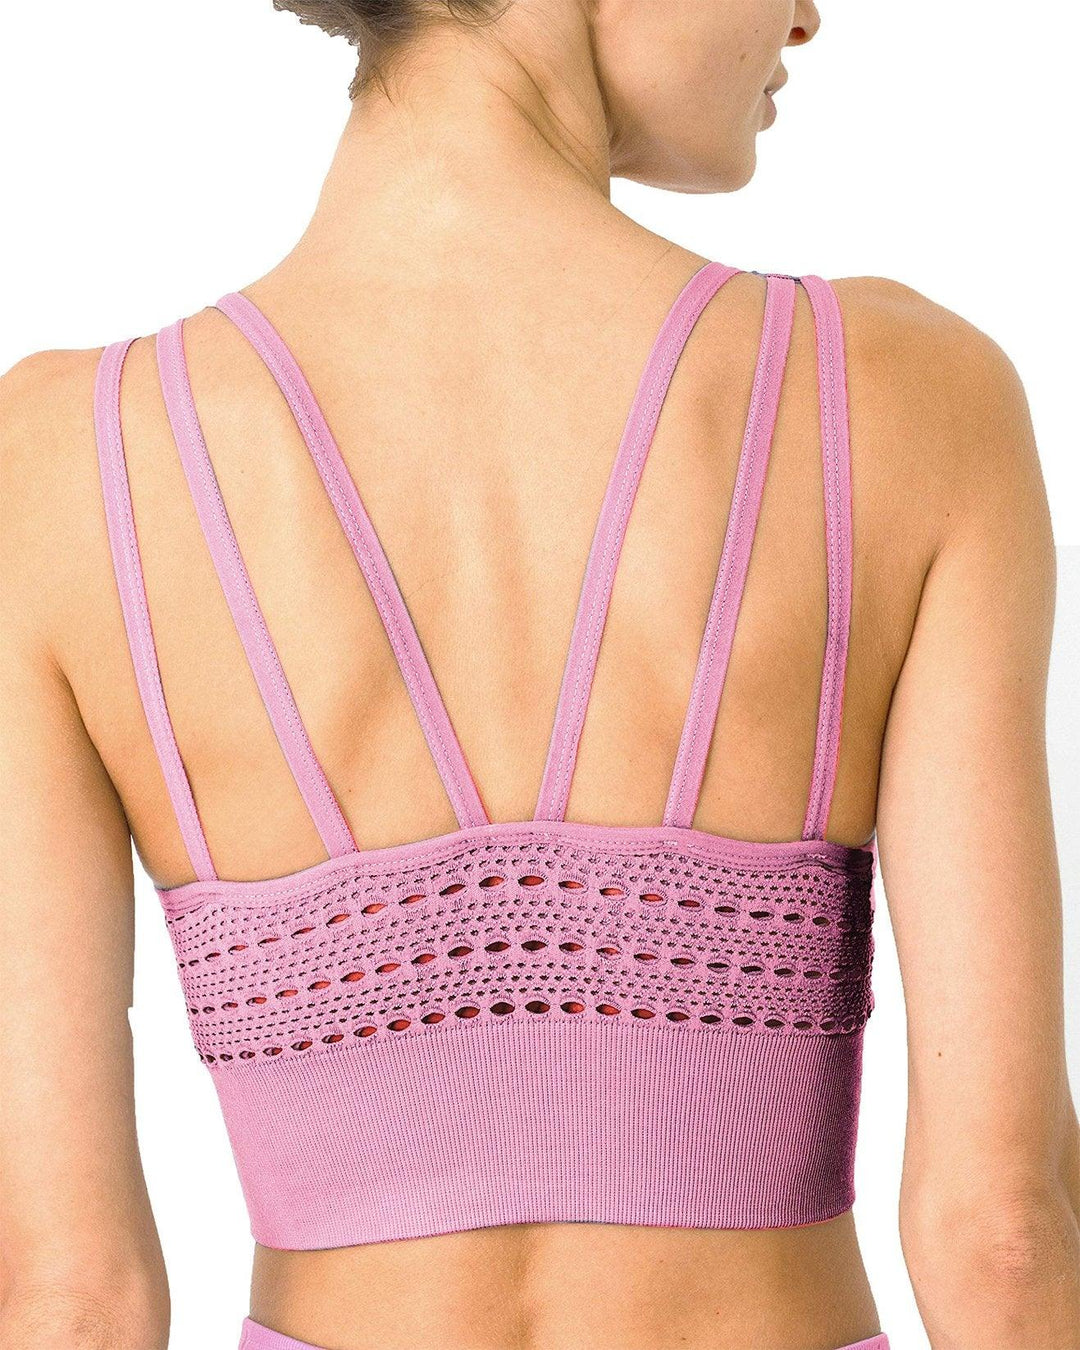 Mesh Seamless Bra with Cutouts - Pink - Brand My Case